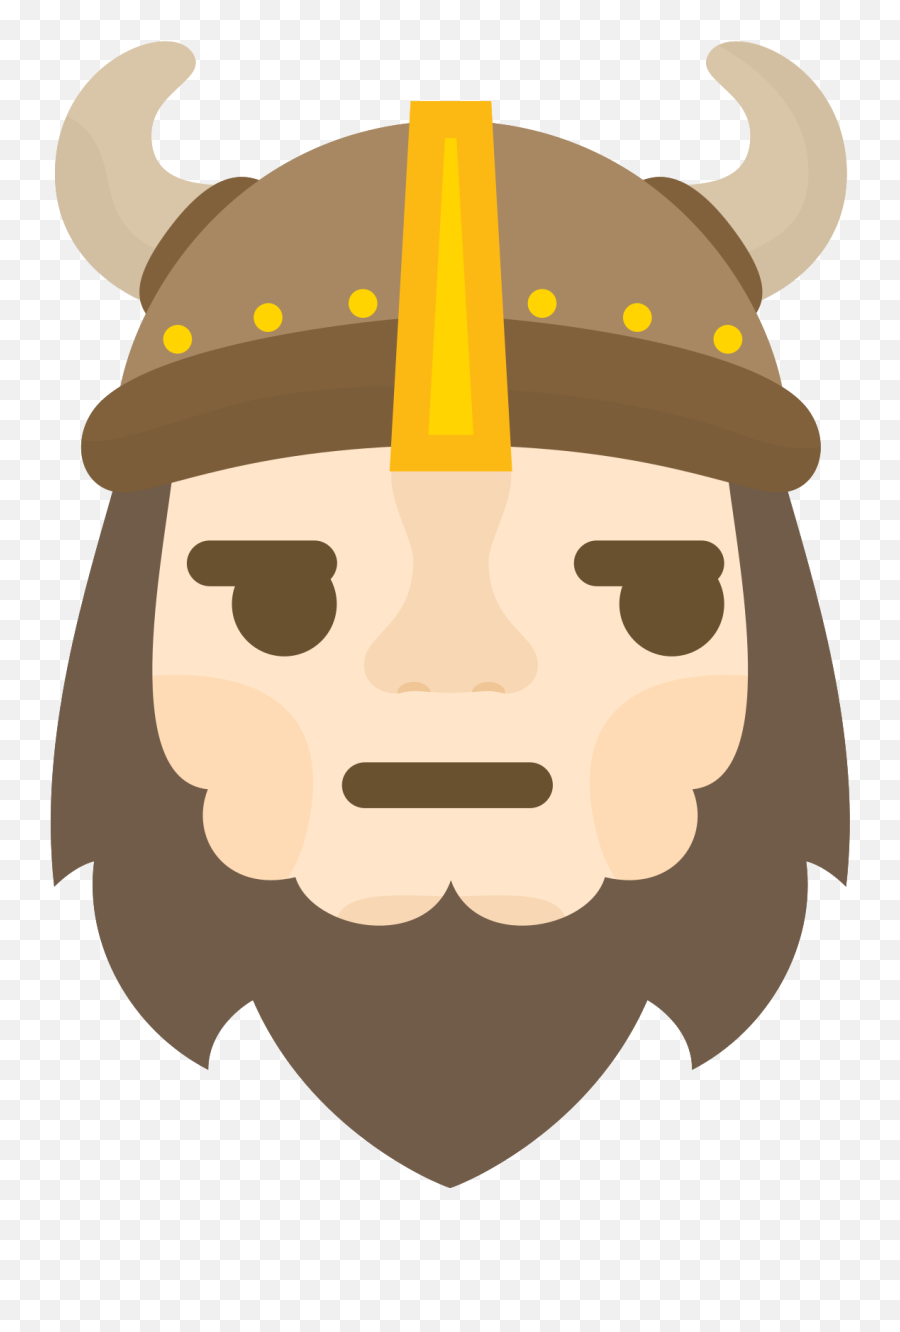 Free Emoji Viking Smirk Png With - Portable Network Graphics,What Is The Smirk Emoji